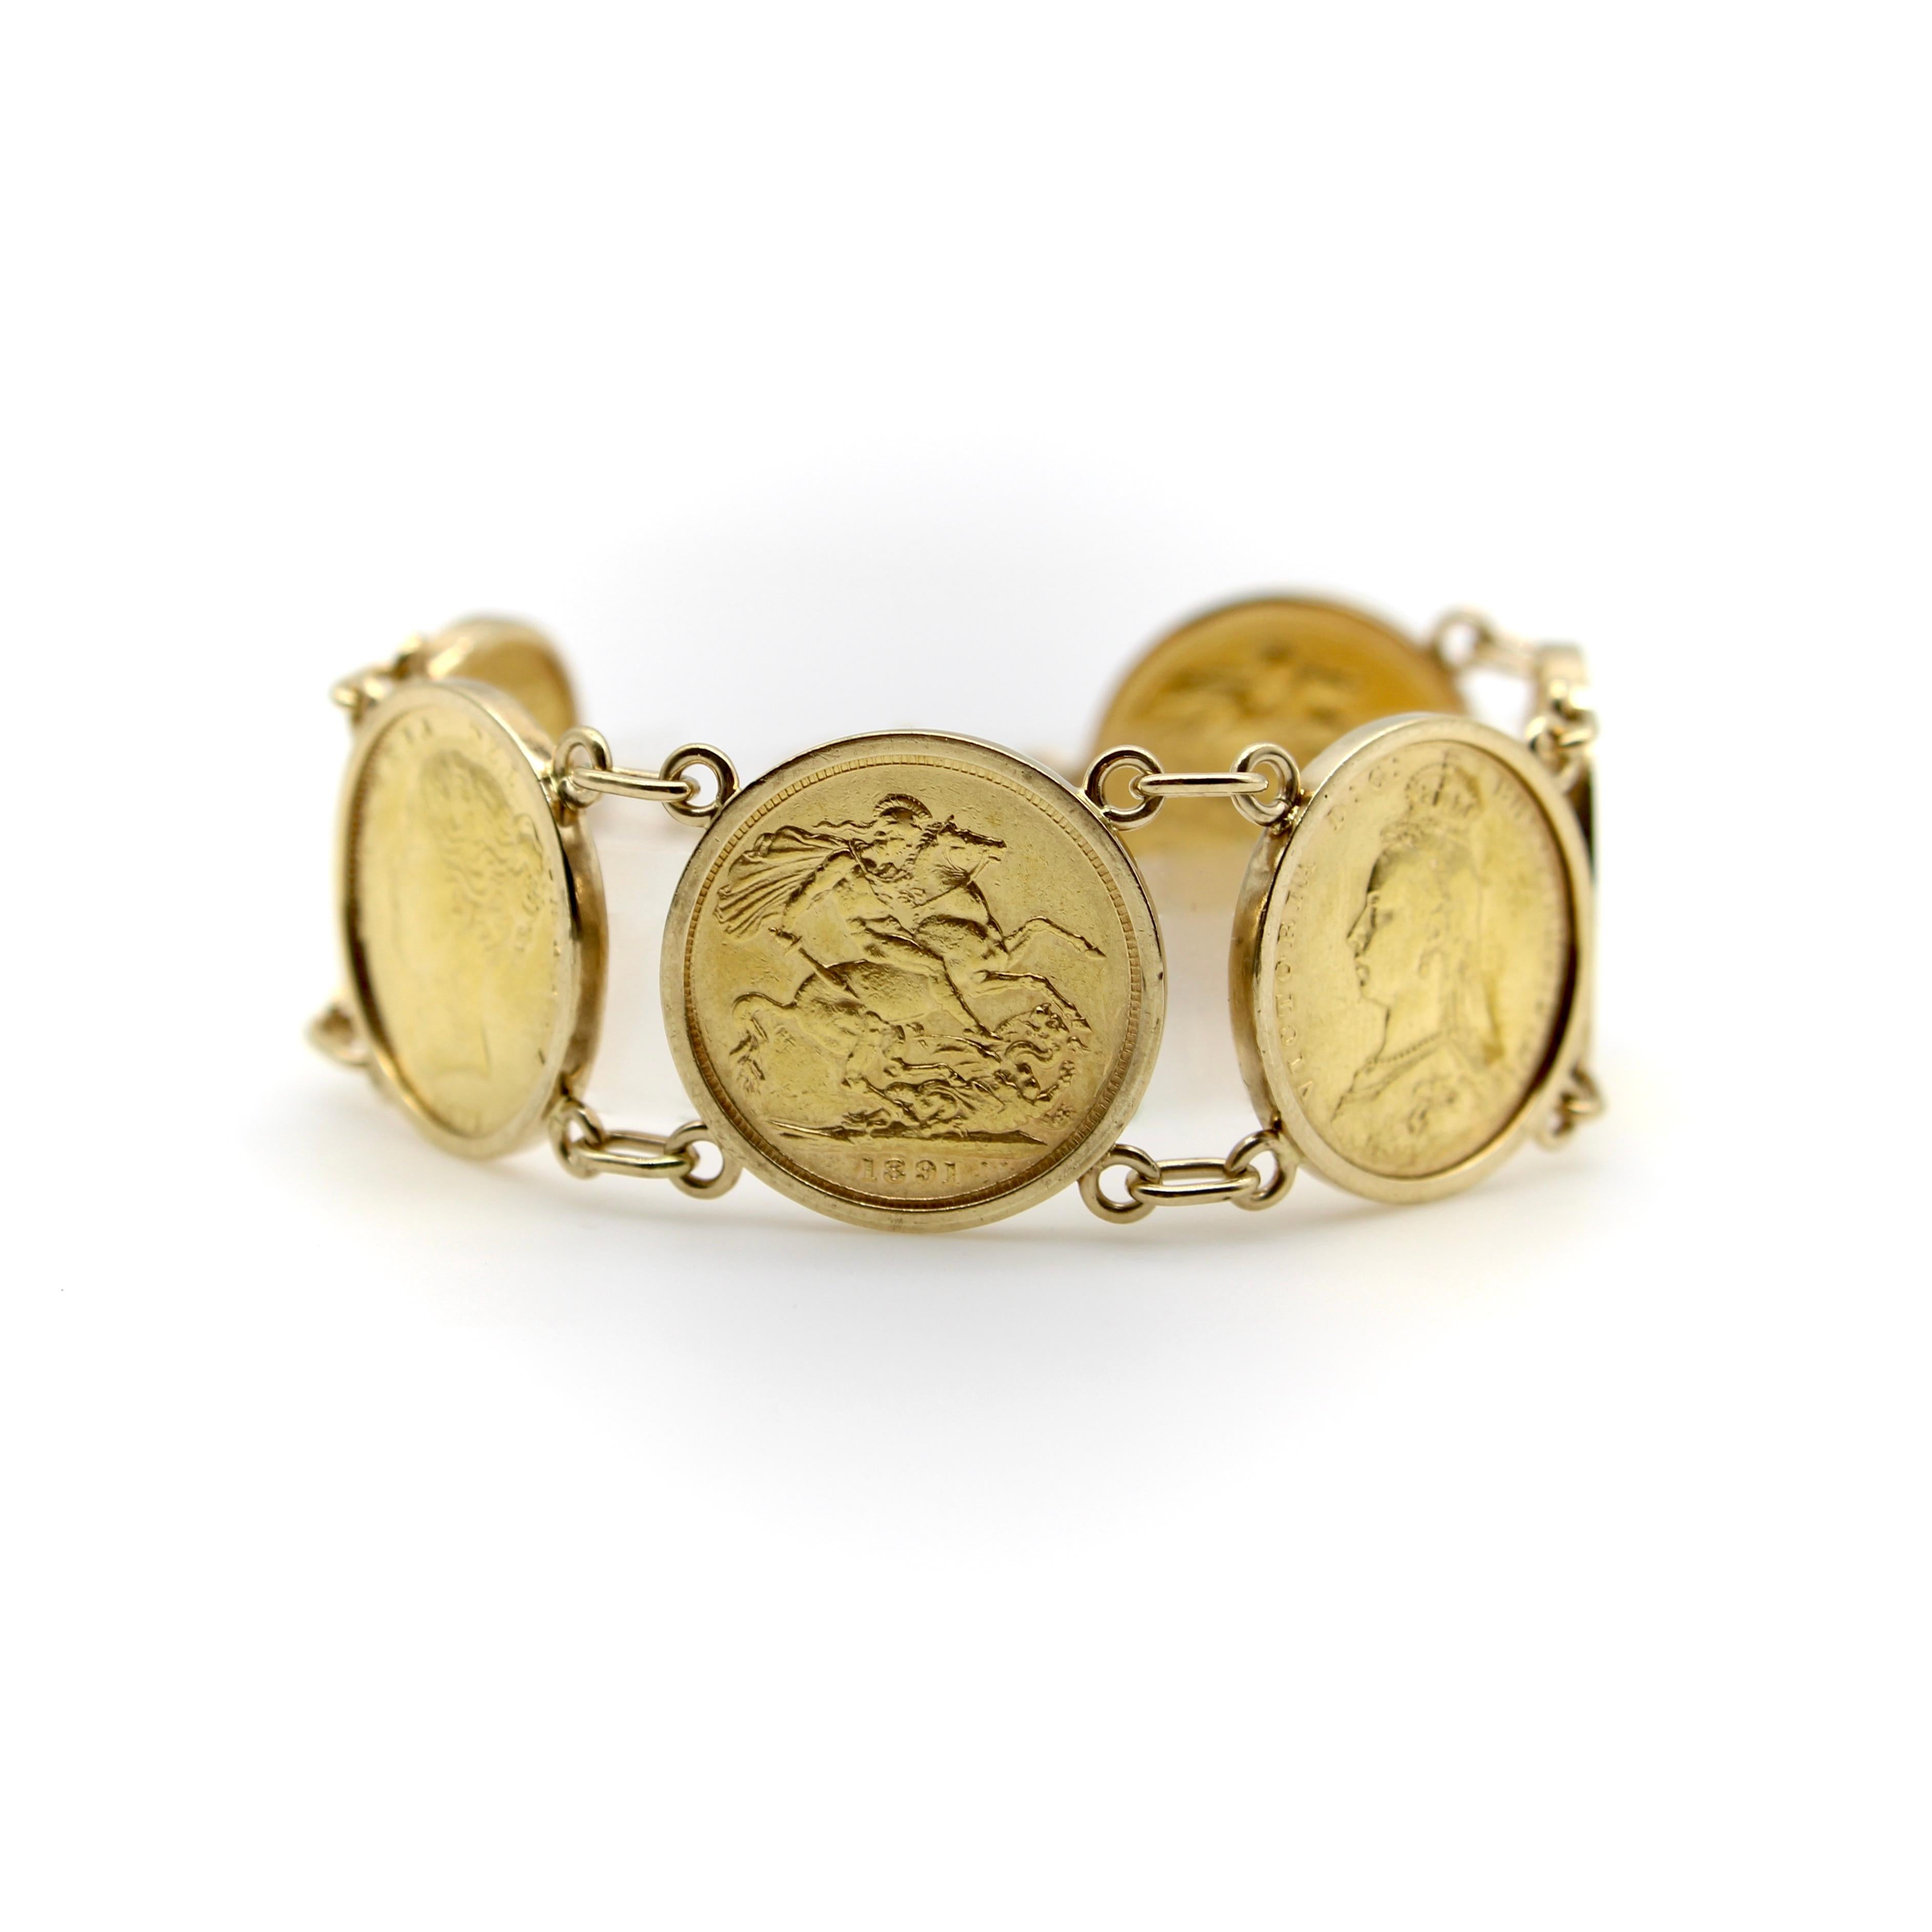 This 22k gold coin bracelet features six British sovereigns in 10k gold surrounds connected with double loops and a spring ring clasp. The coins range in date from 1877 through 1900, each with the portrait of Queen Victoria at various stages of